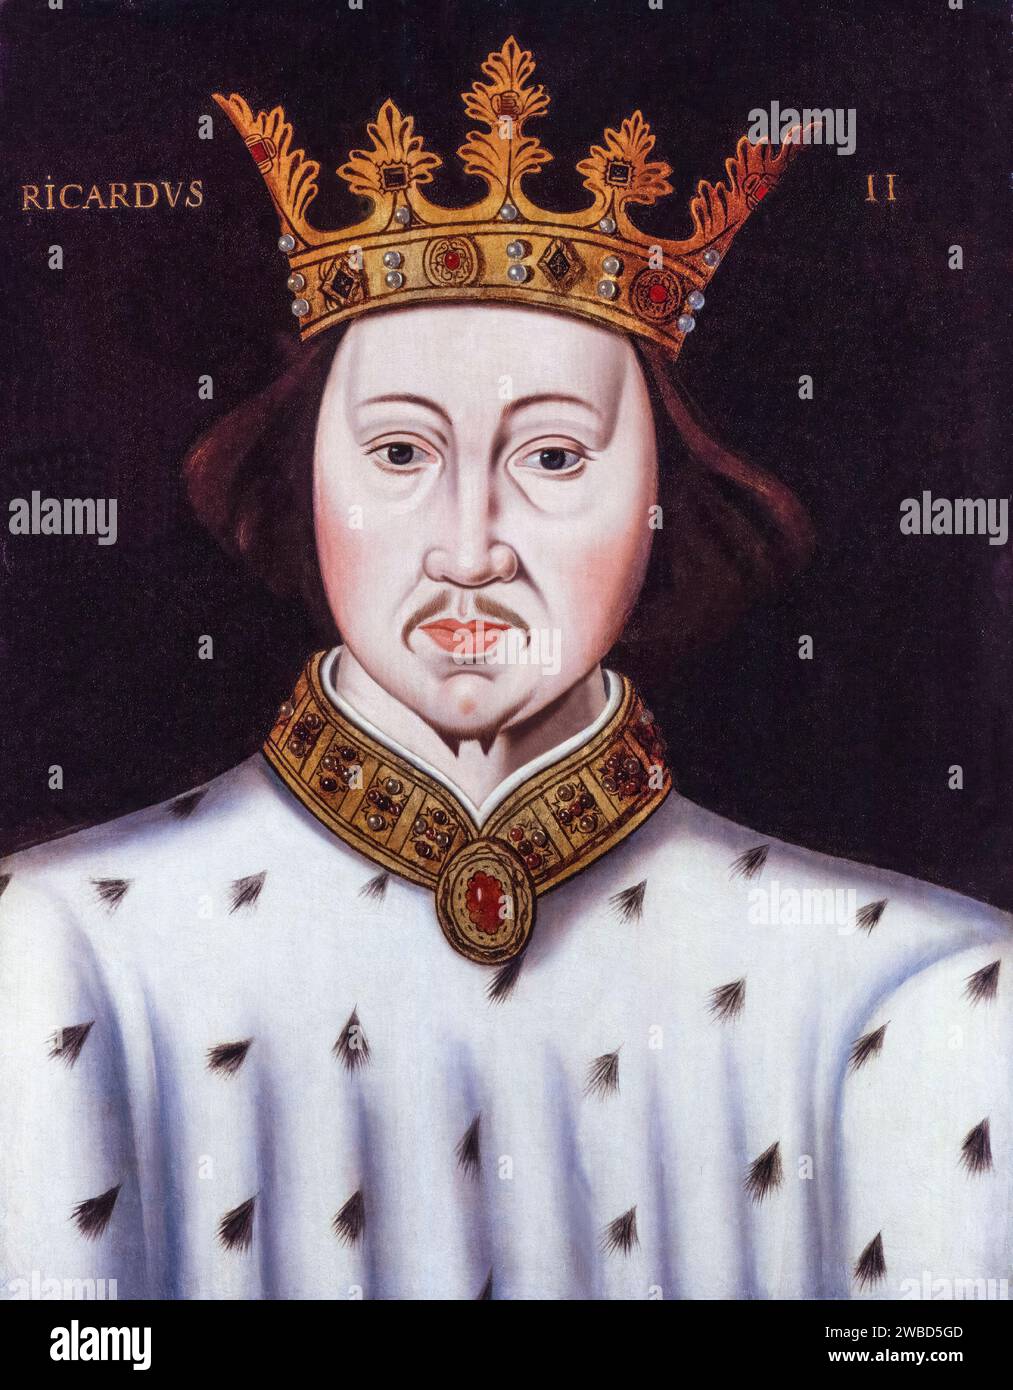 King Richard II of England (1367-1400), Reigned (1377-1399), portrait painting in oil on panel by unknown artist, 1500-1599 Stock Photo